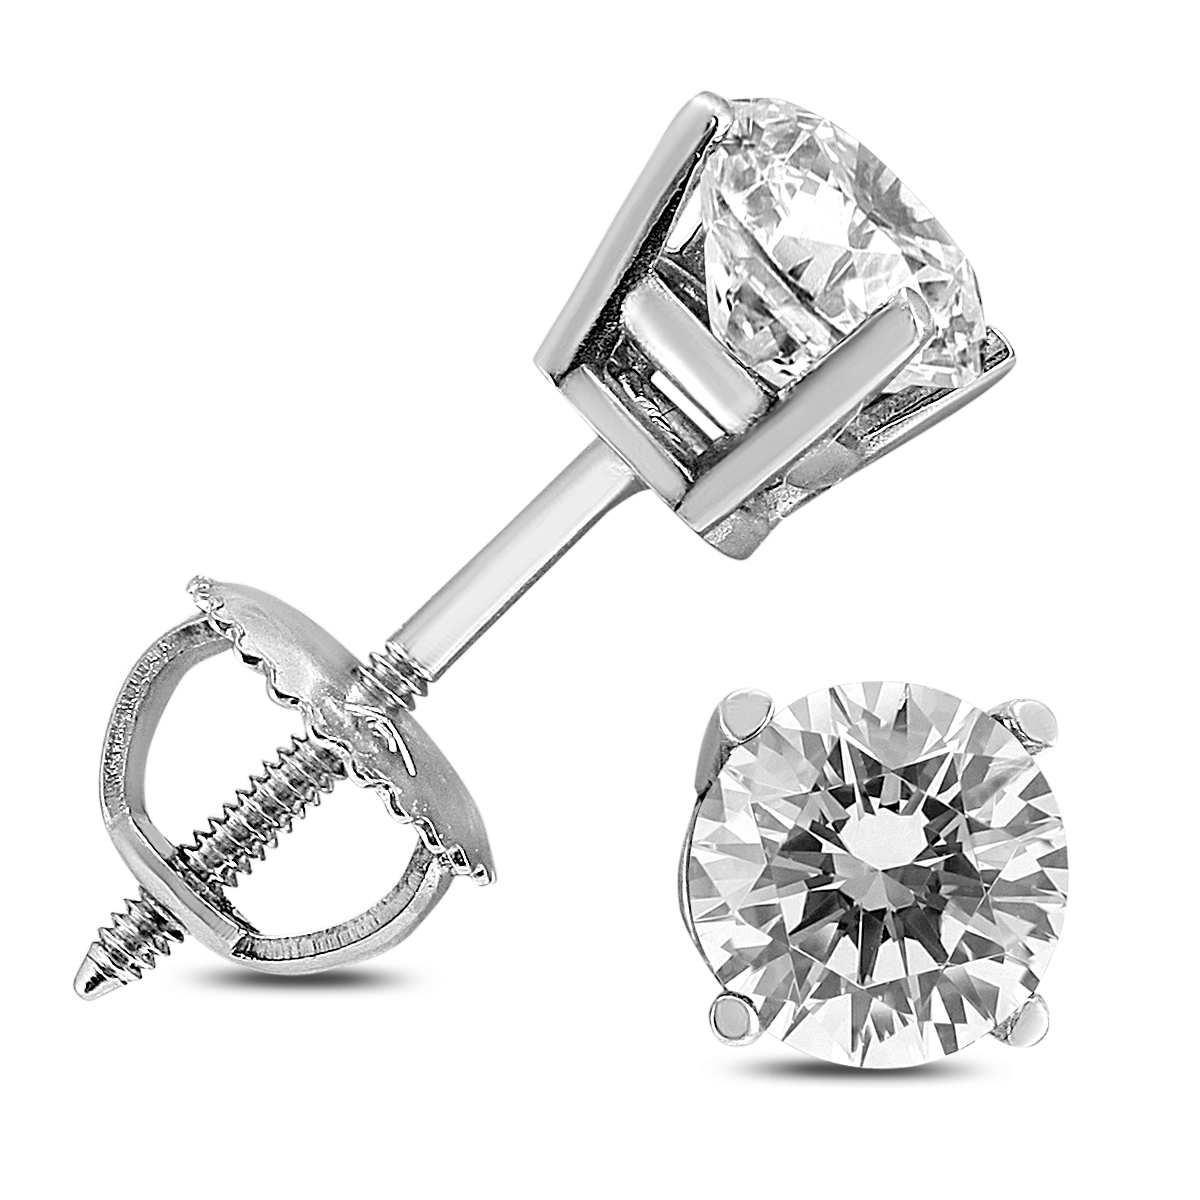 1 1/4 Carat TW AGS Certified Round Diamond Solitaire Stud Earrings in 14K White Gold